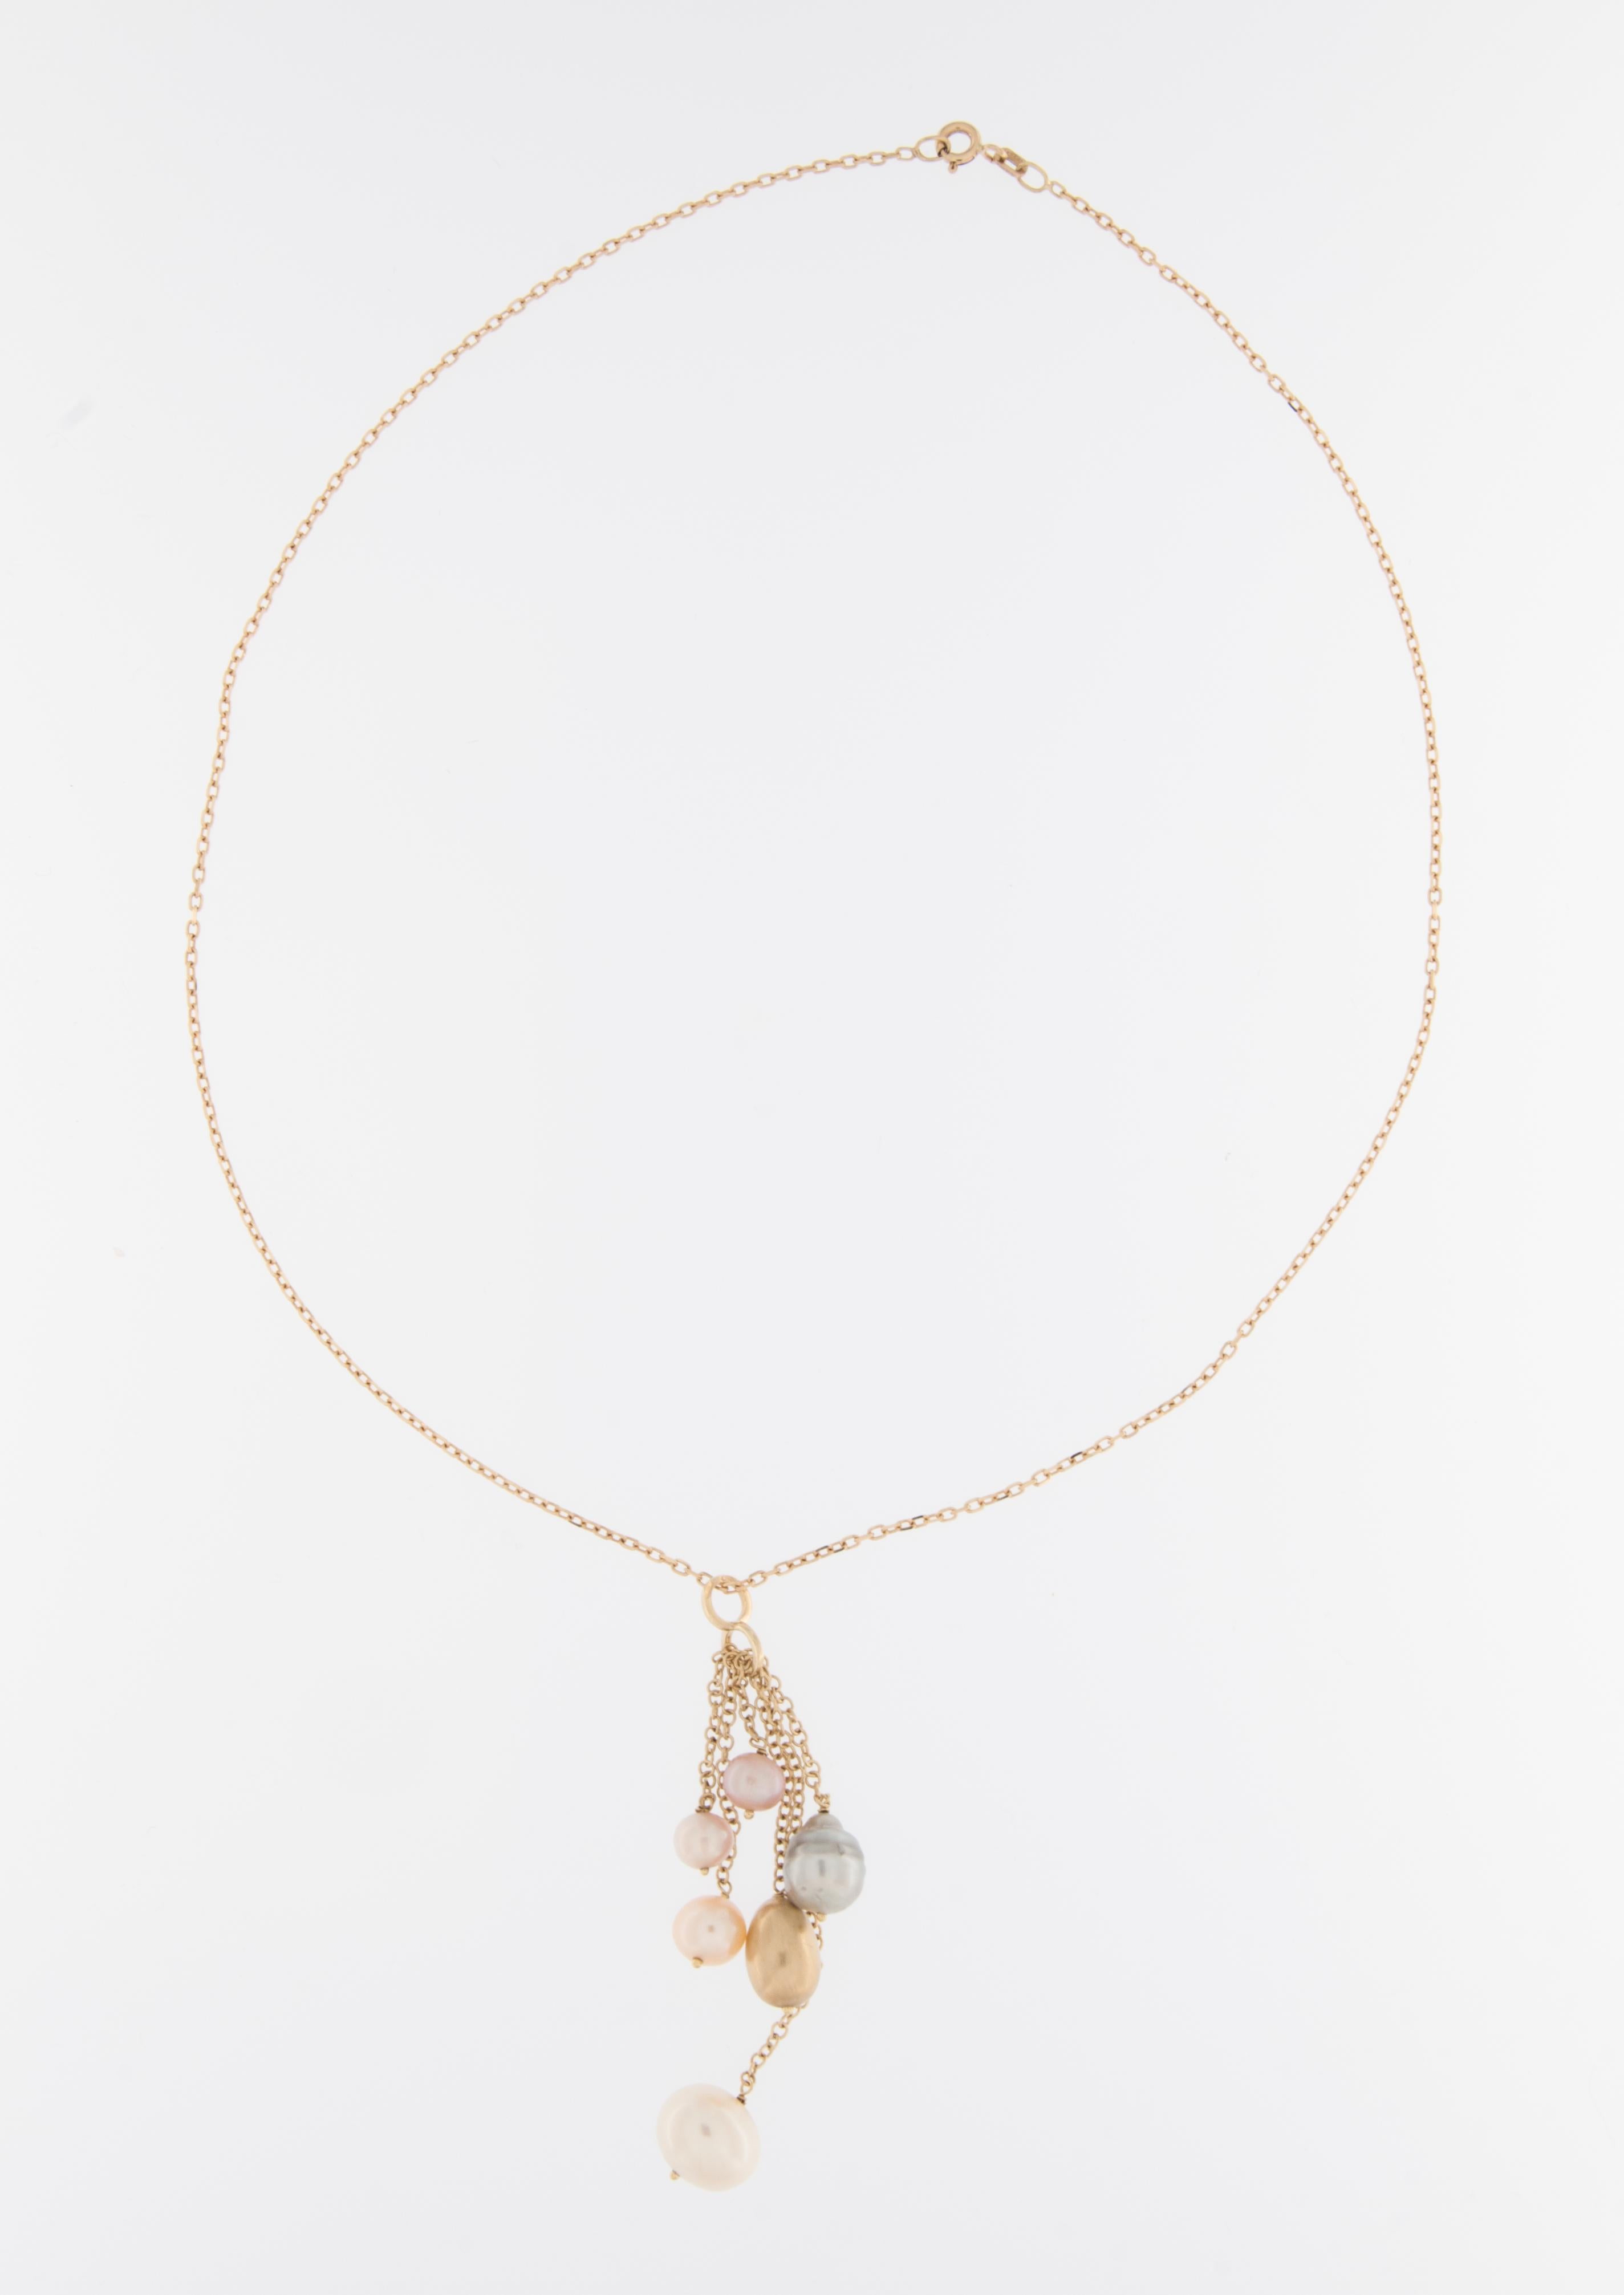 The Italian Modern 18kt Yellow Gold Necklace with Pearls is a stunning piece of jewelry that combines classic elegance with contemporary design. 

This necklace is crafted from high-quality 18-karat yellow gold, known for its durability and